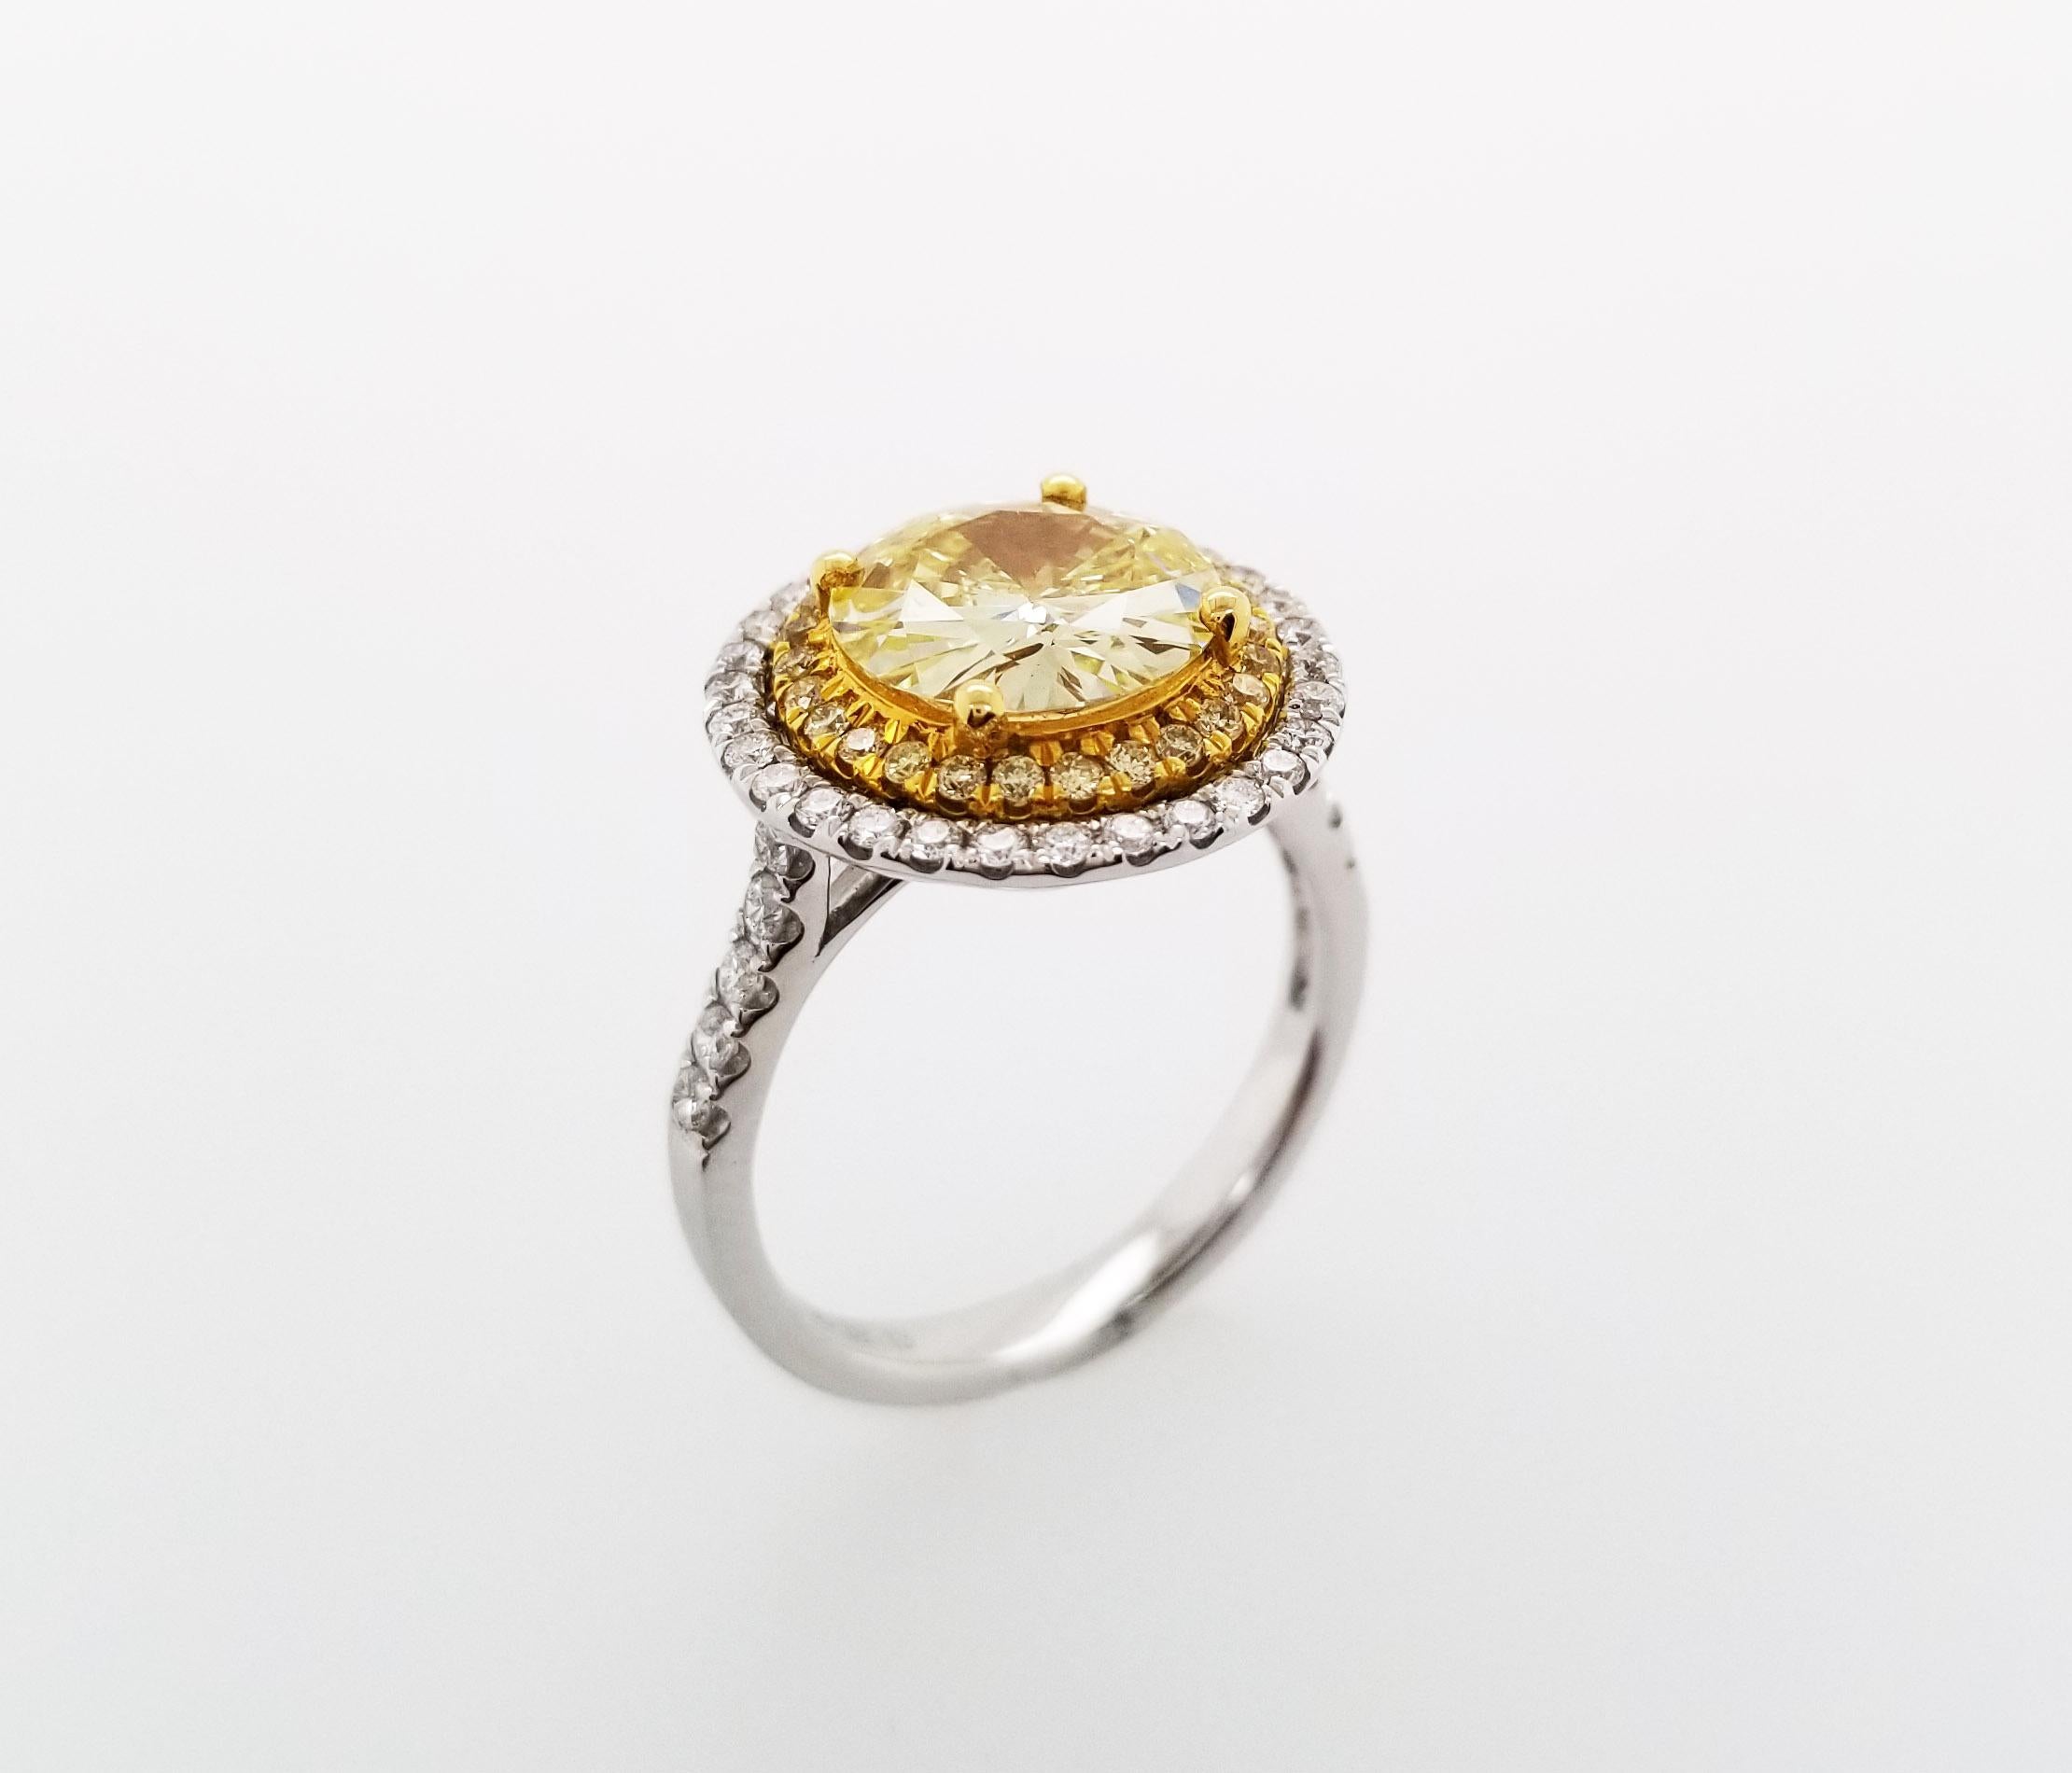 This Beautiful sunflower inspired design Ring From Scarselli features a 2-carat Fancy Yellow round brilliant Cut Diamond VS1 clarity with GIA certificate (see certificate picture for more detailed stone's information)  The center diamond is